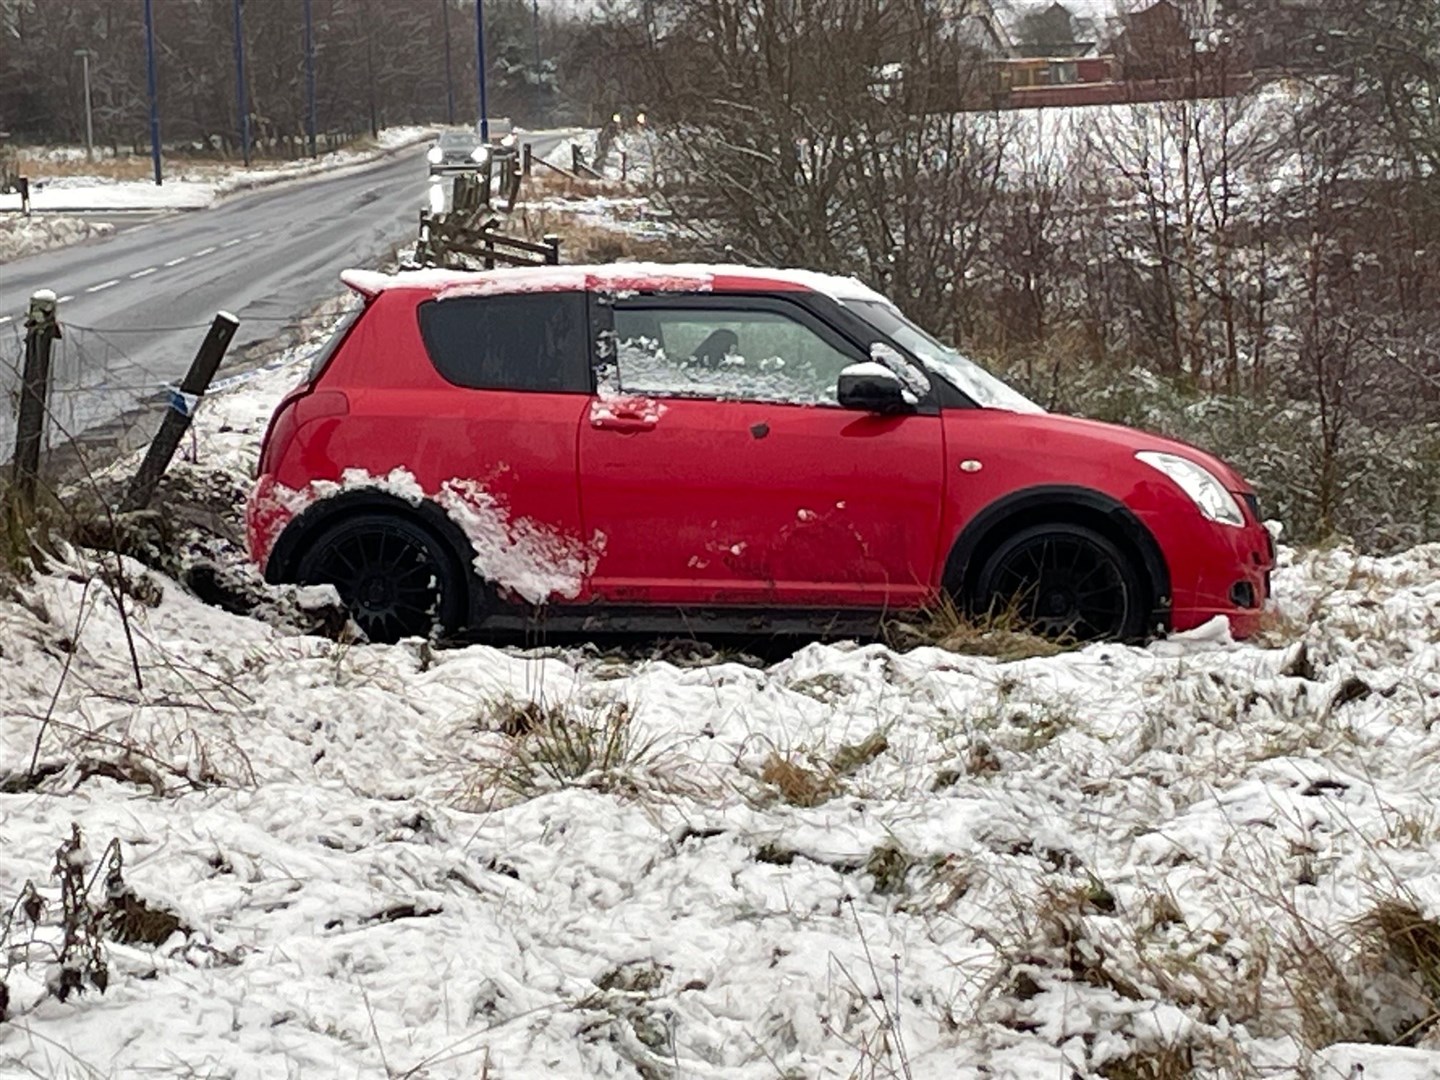 Car crash early this morning by Aviemore